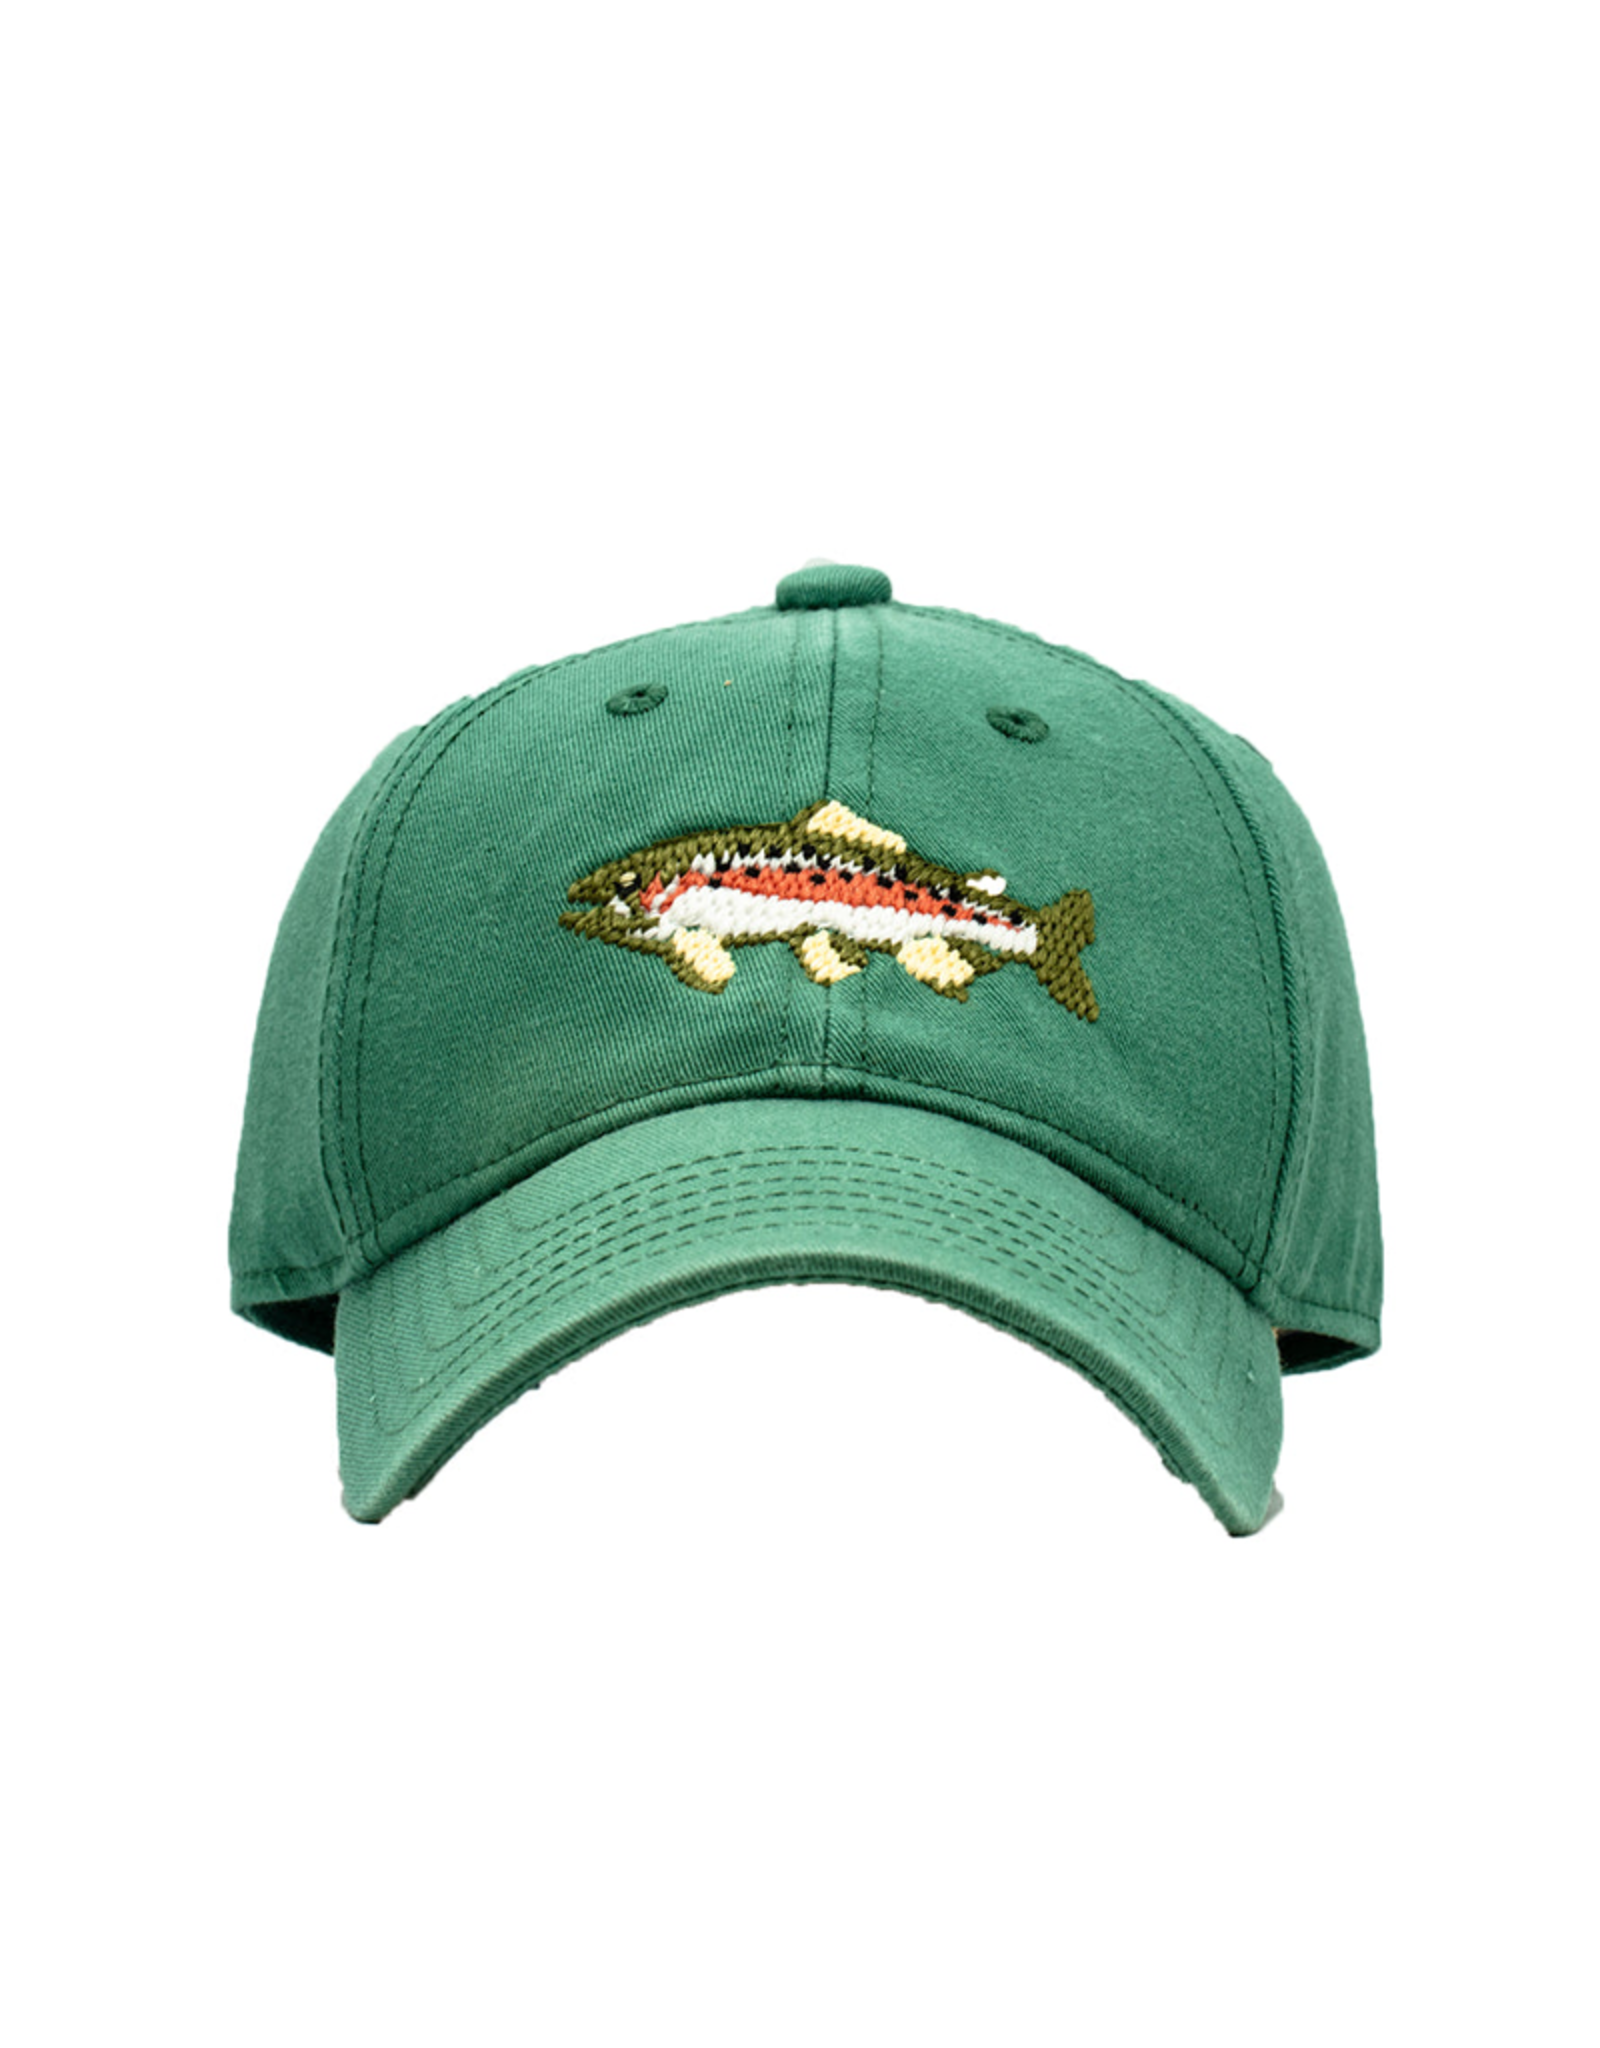 Harding Lane HL Embroidered Hat Moss Green Trout